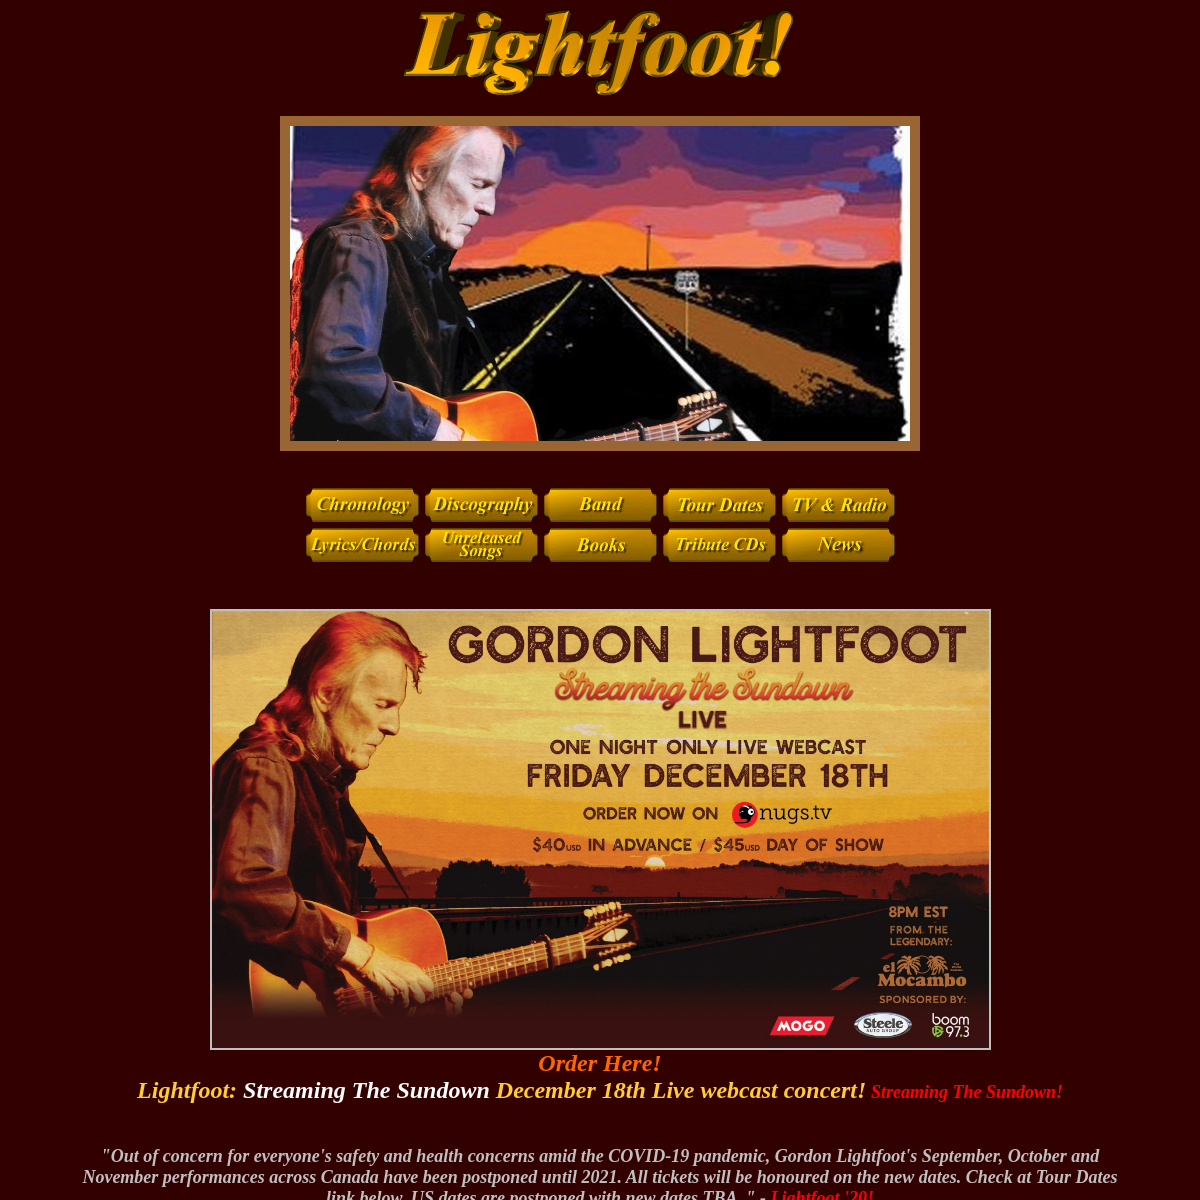 A complete backup of lightfoot.ca